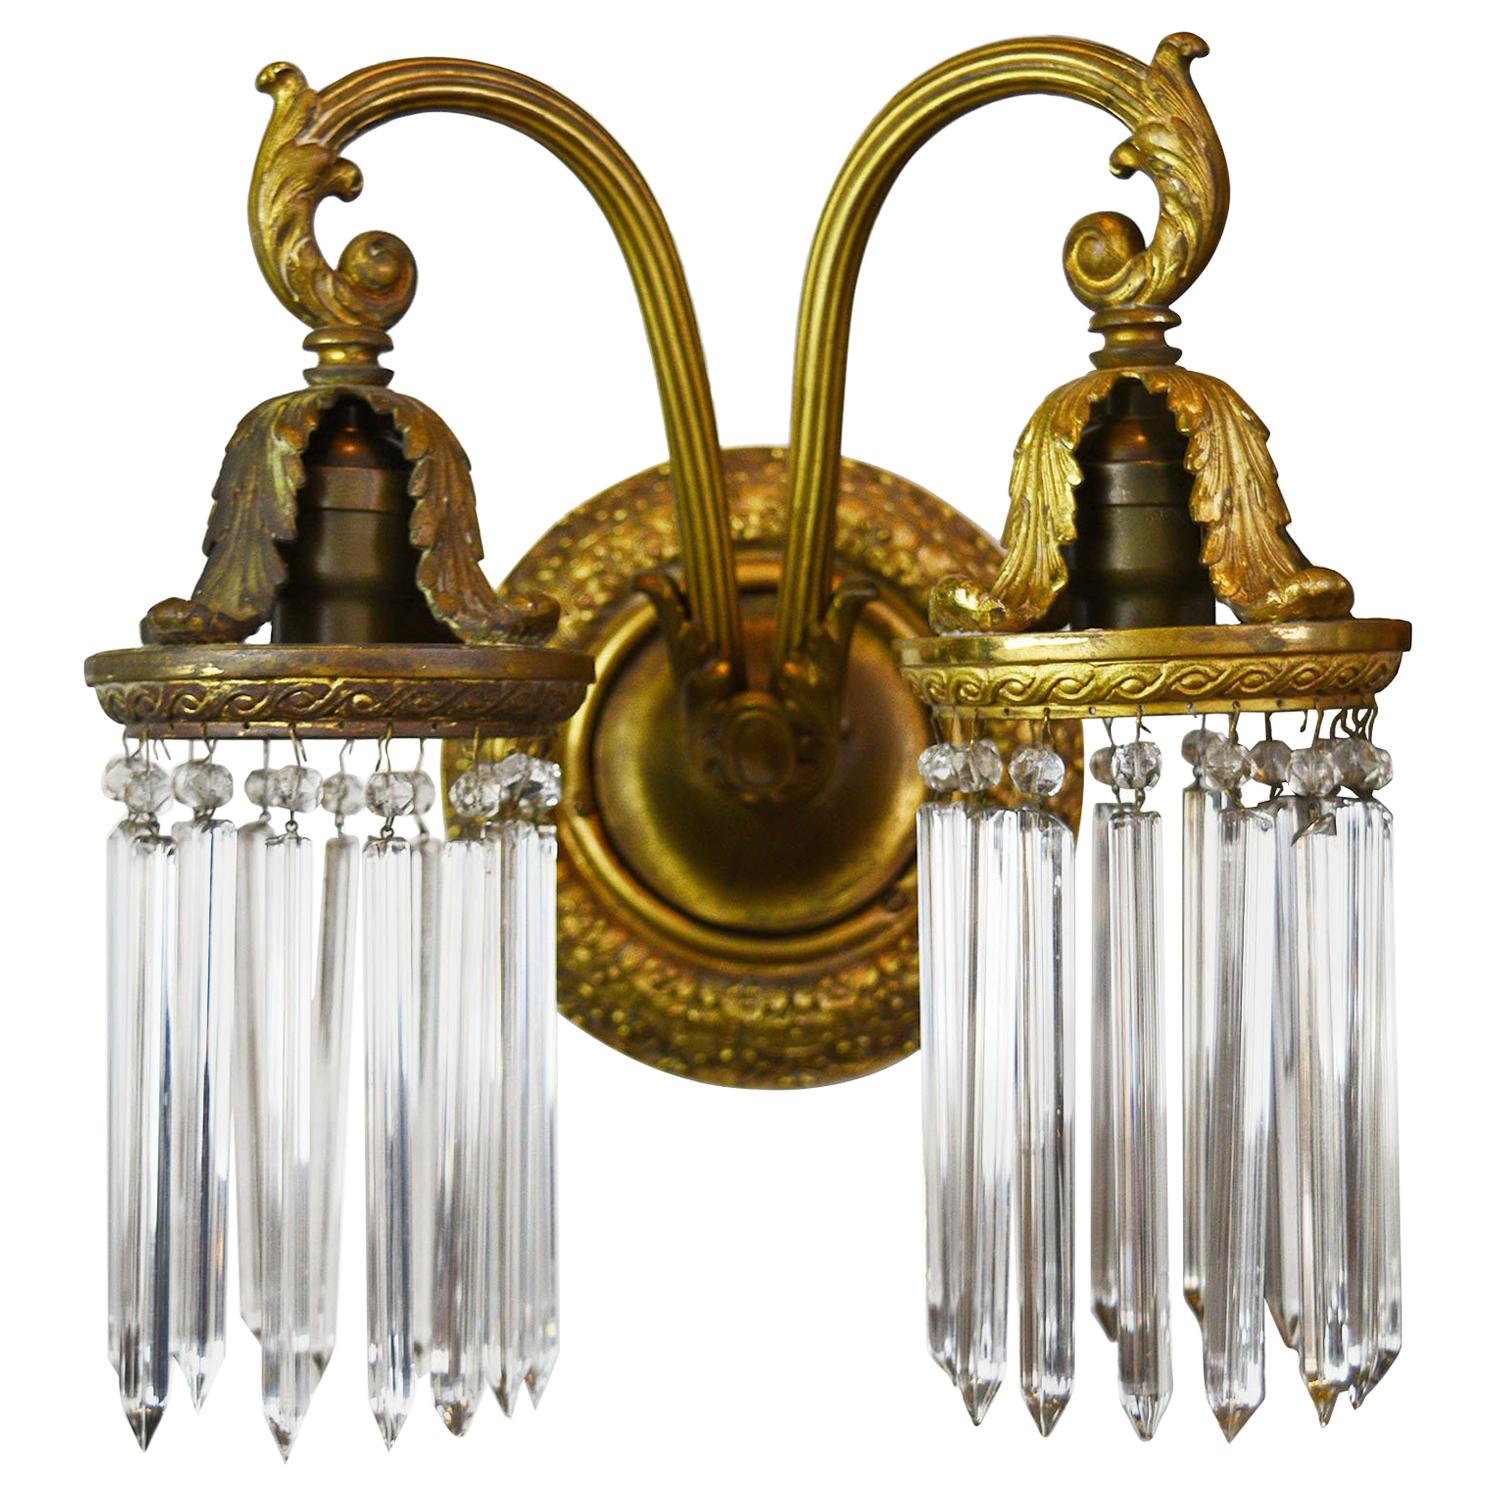 Two-Arm Brass Sconce with Crystal Prisms